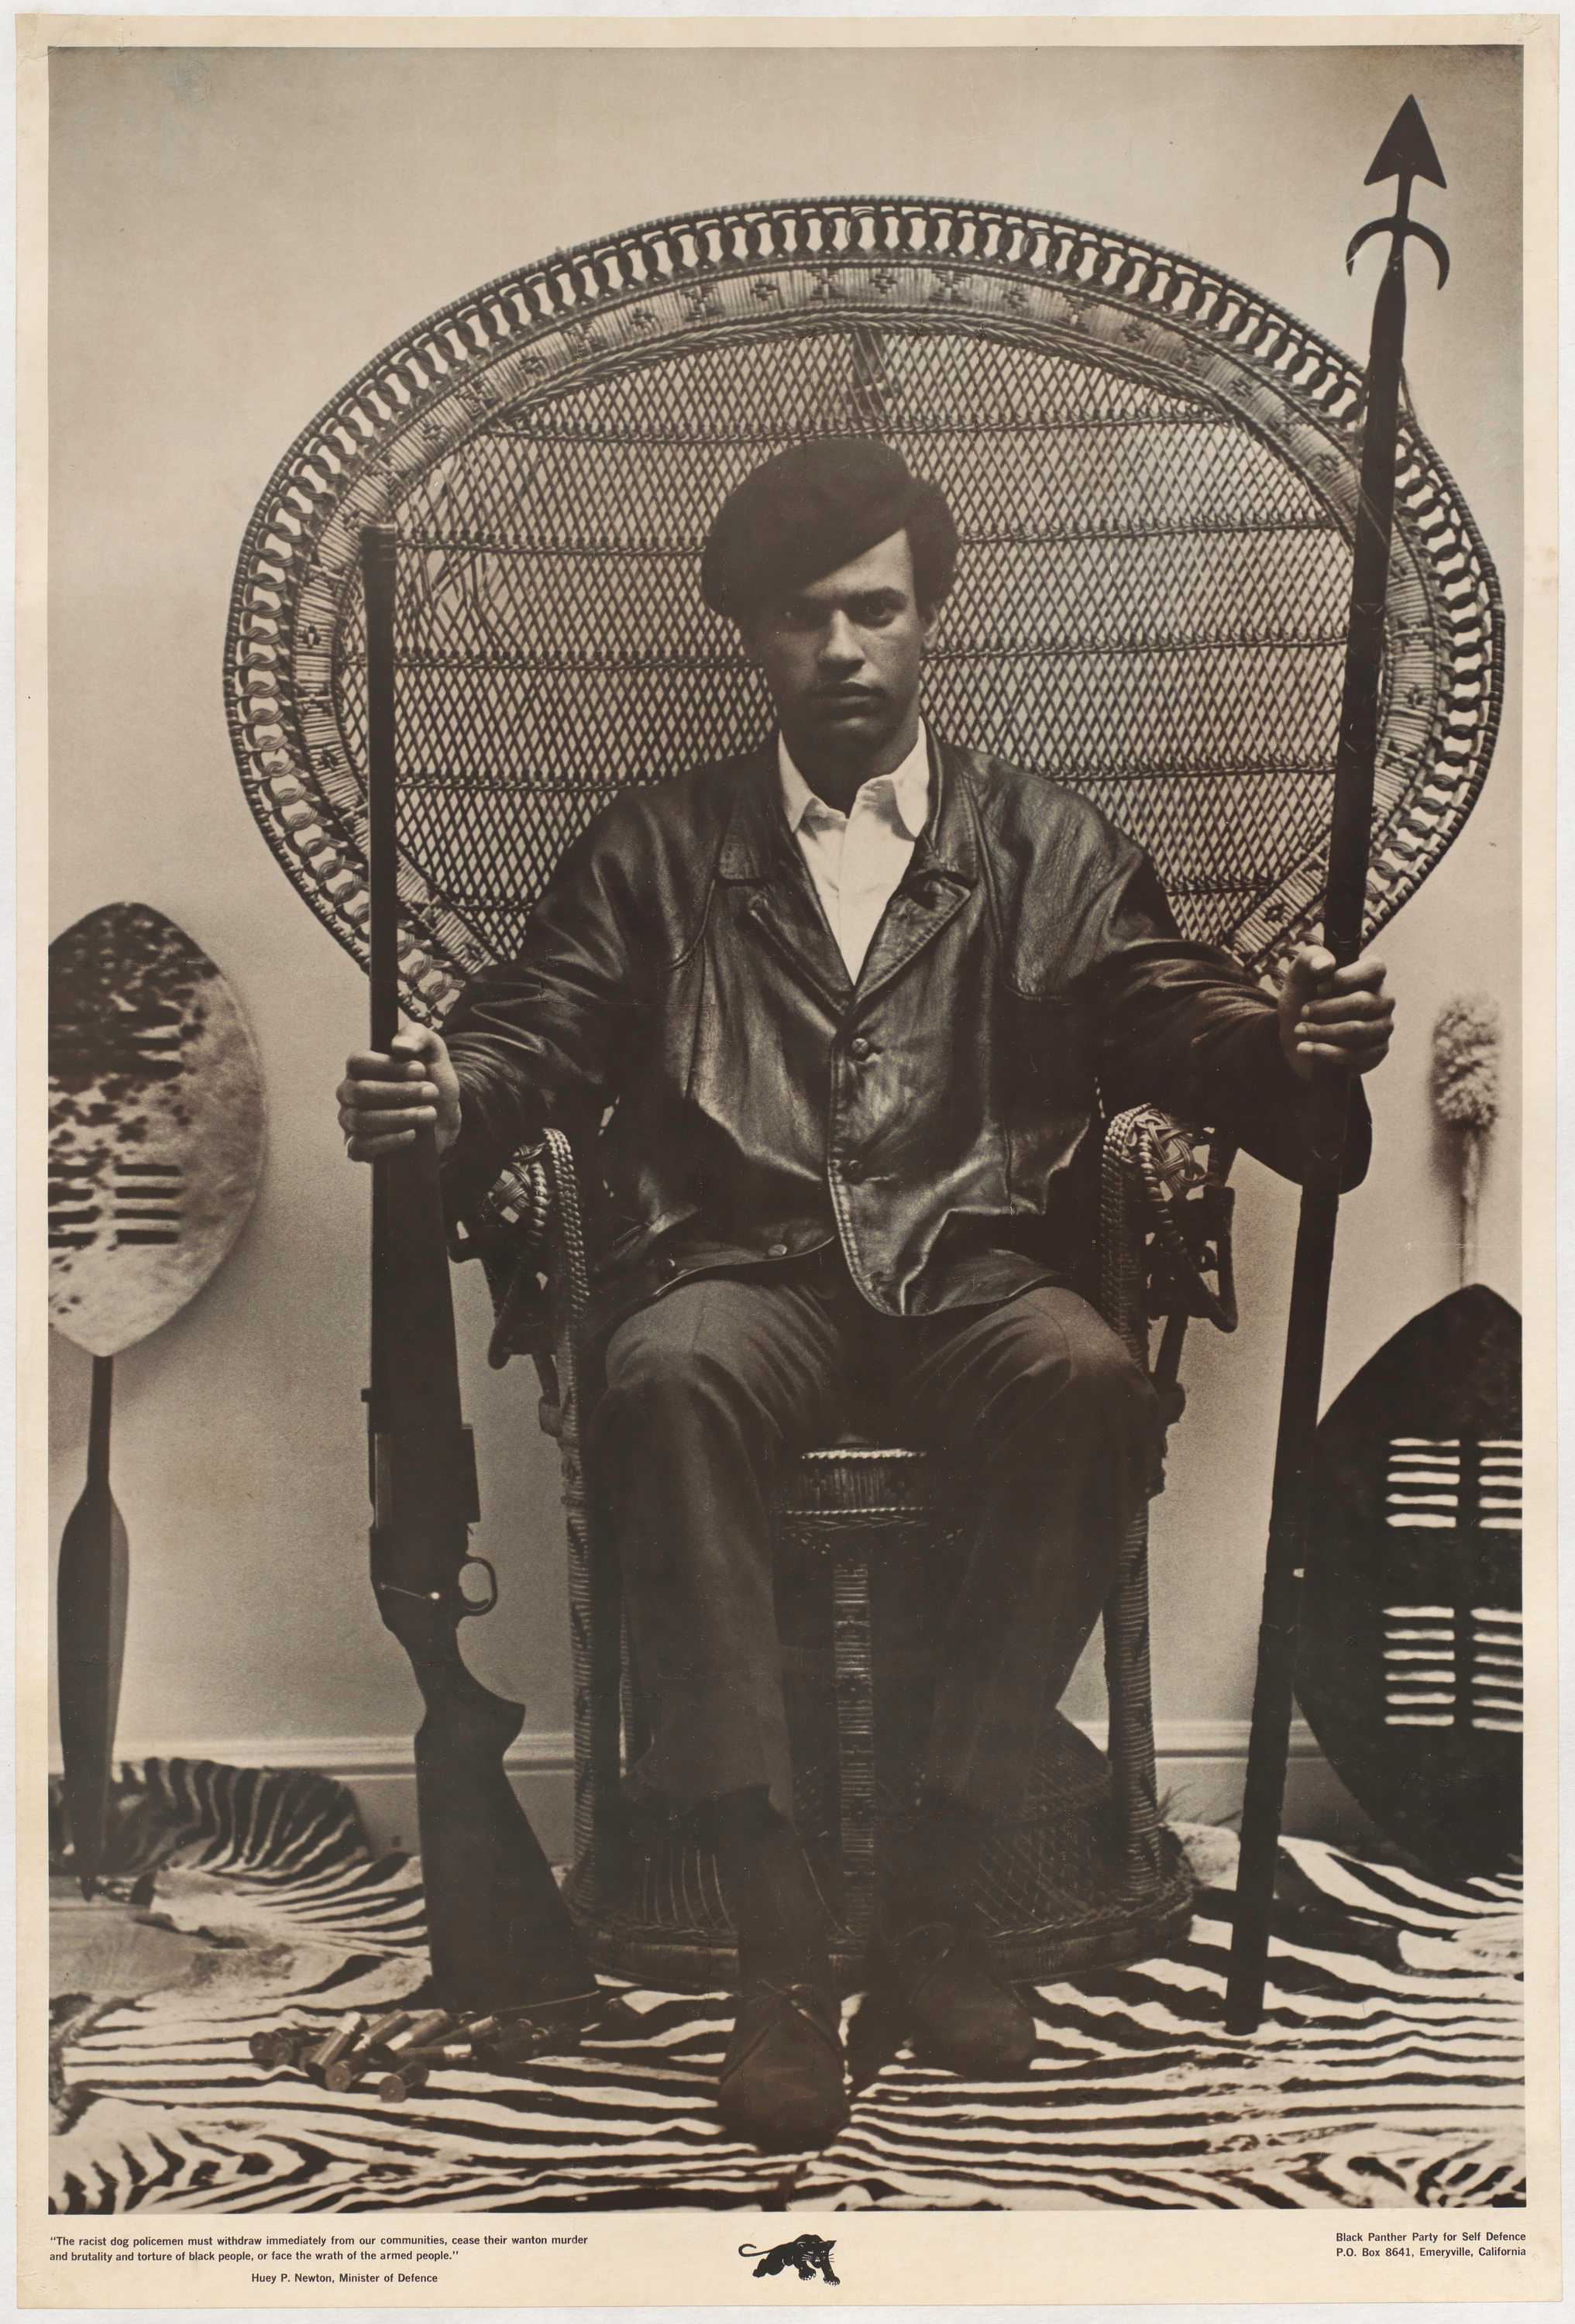 Man (Huey Newton) sitting in a rattan throne chair wearing a beret and a black leather jacket while holding a shotgun in his right hand and a spear in his left hand. Leaning against the wall on either side of the chair is a leaf-shaped, Zulu style shield with designs of horizontal line markings across the front.